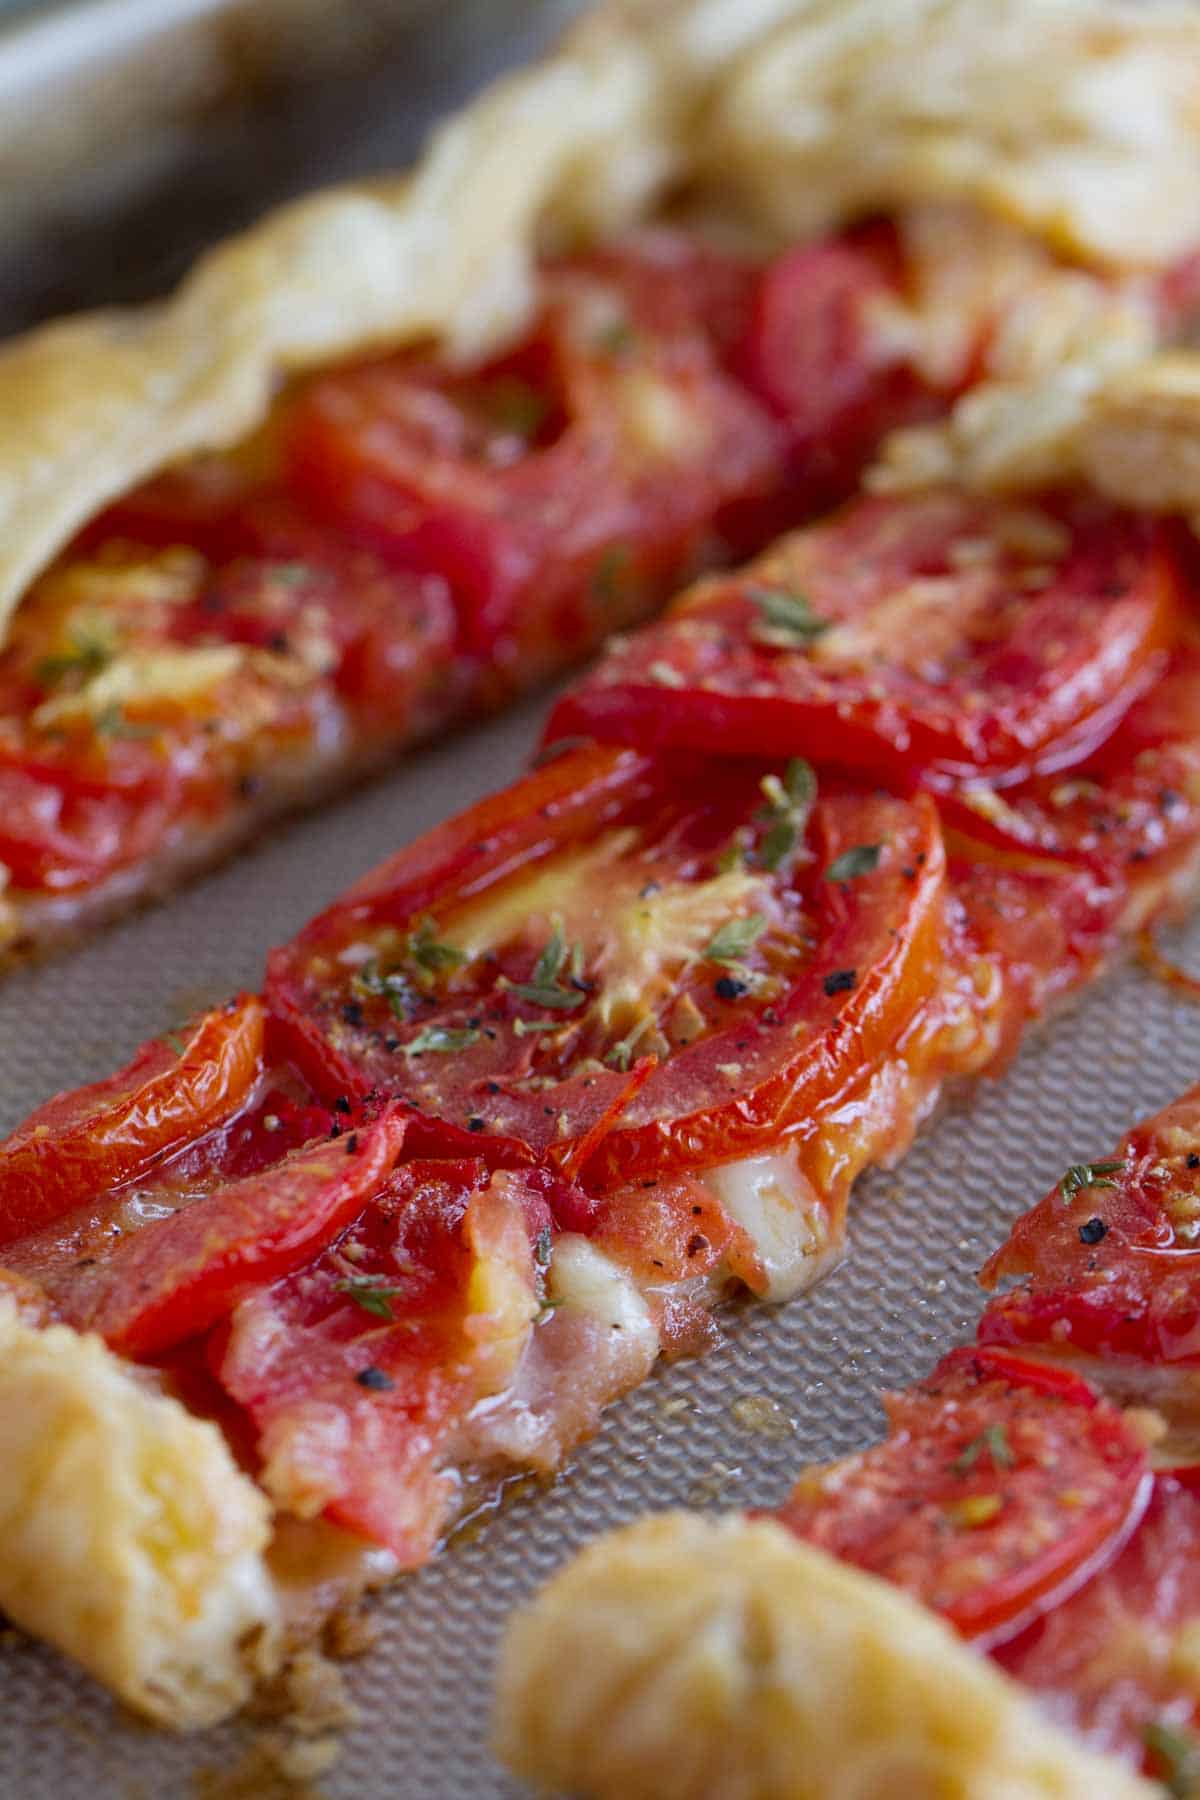 Slices of Tomato Tart with Bacon and Gruyere.